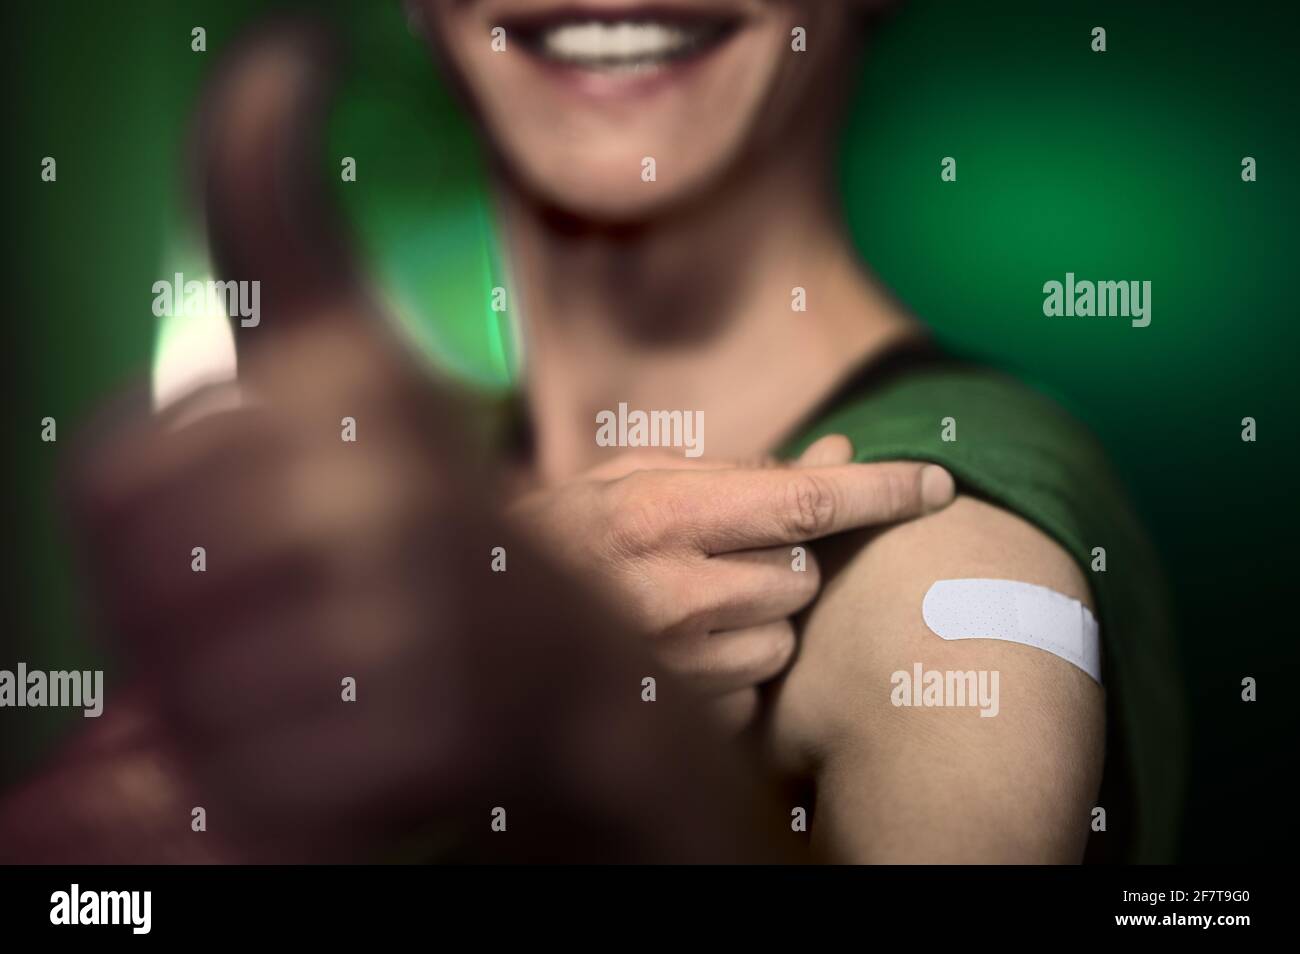 Vacinee person with plaster on arm after vaccination thumbs up for virus immunization inoculation injection Stock Photo